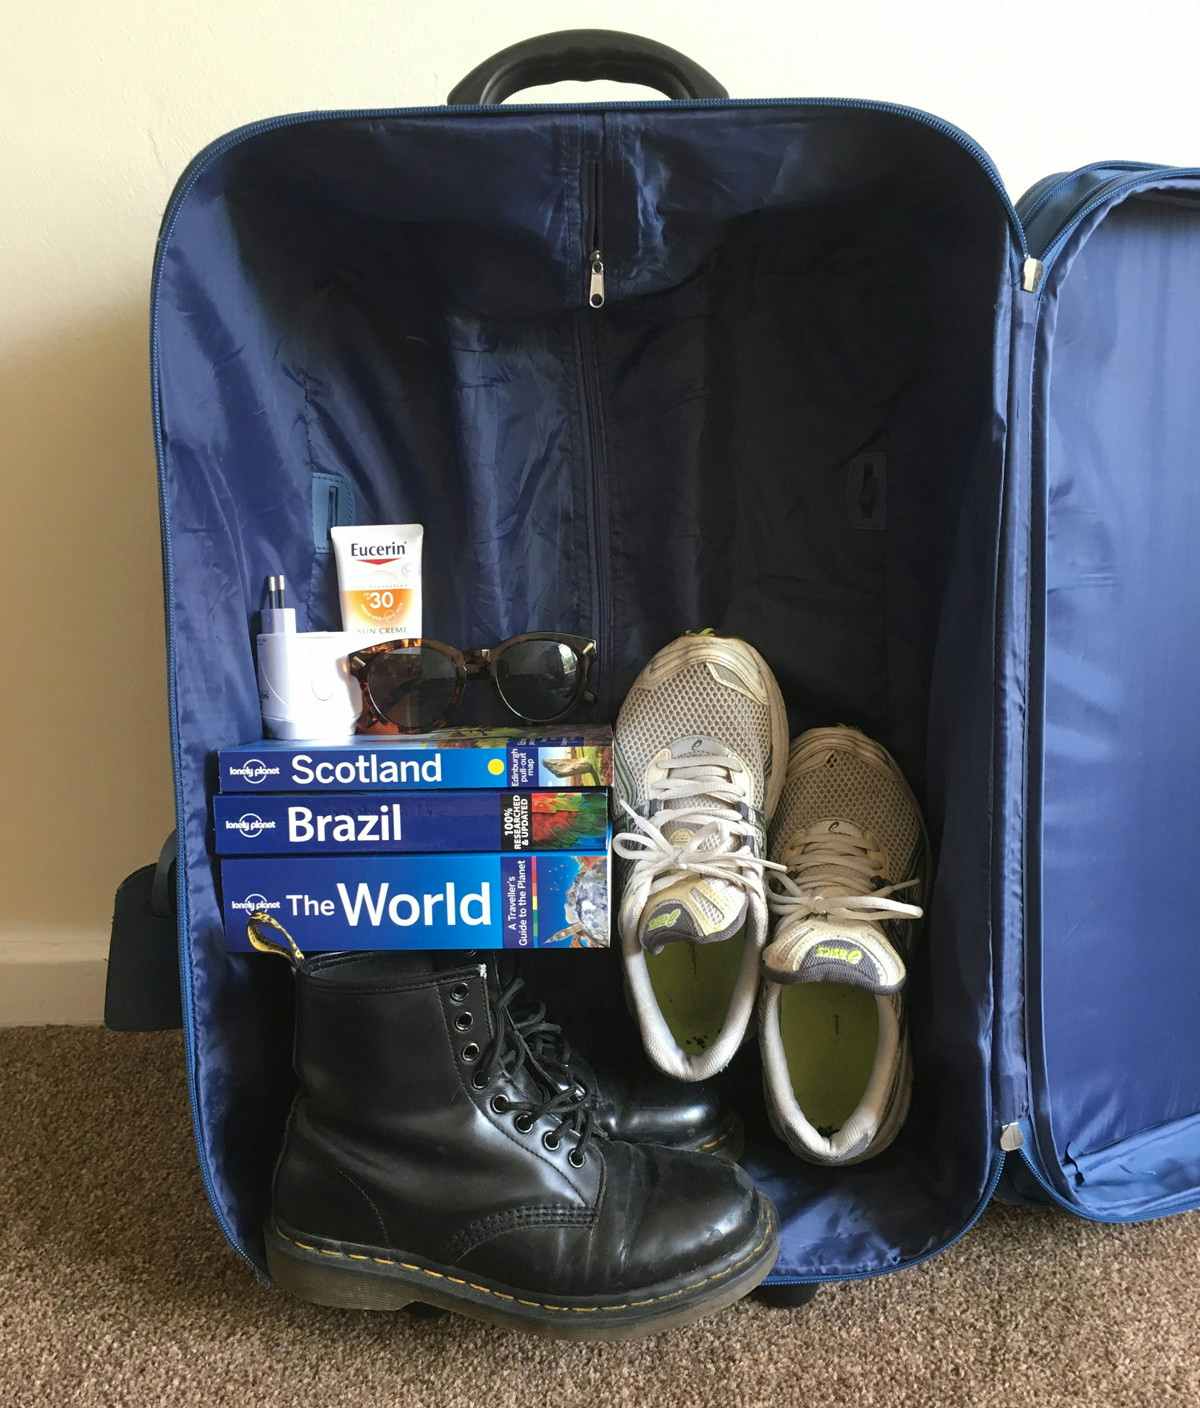 Pack the heaviest items in the bottom of a suitcase for easier rolling and less clothing wrinkles.